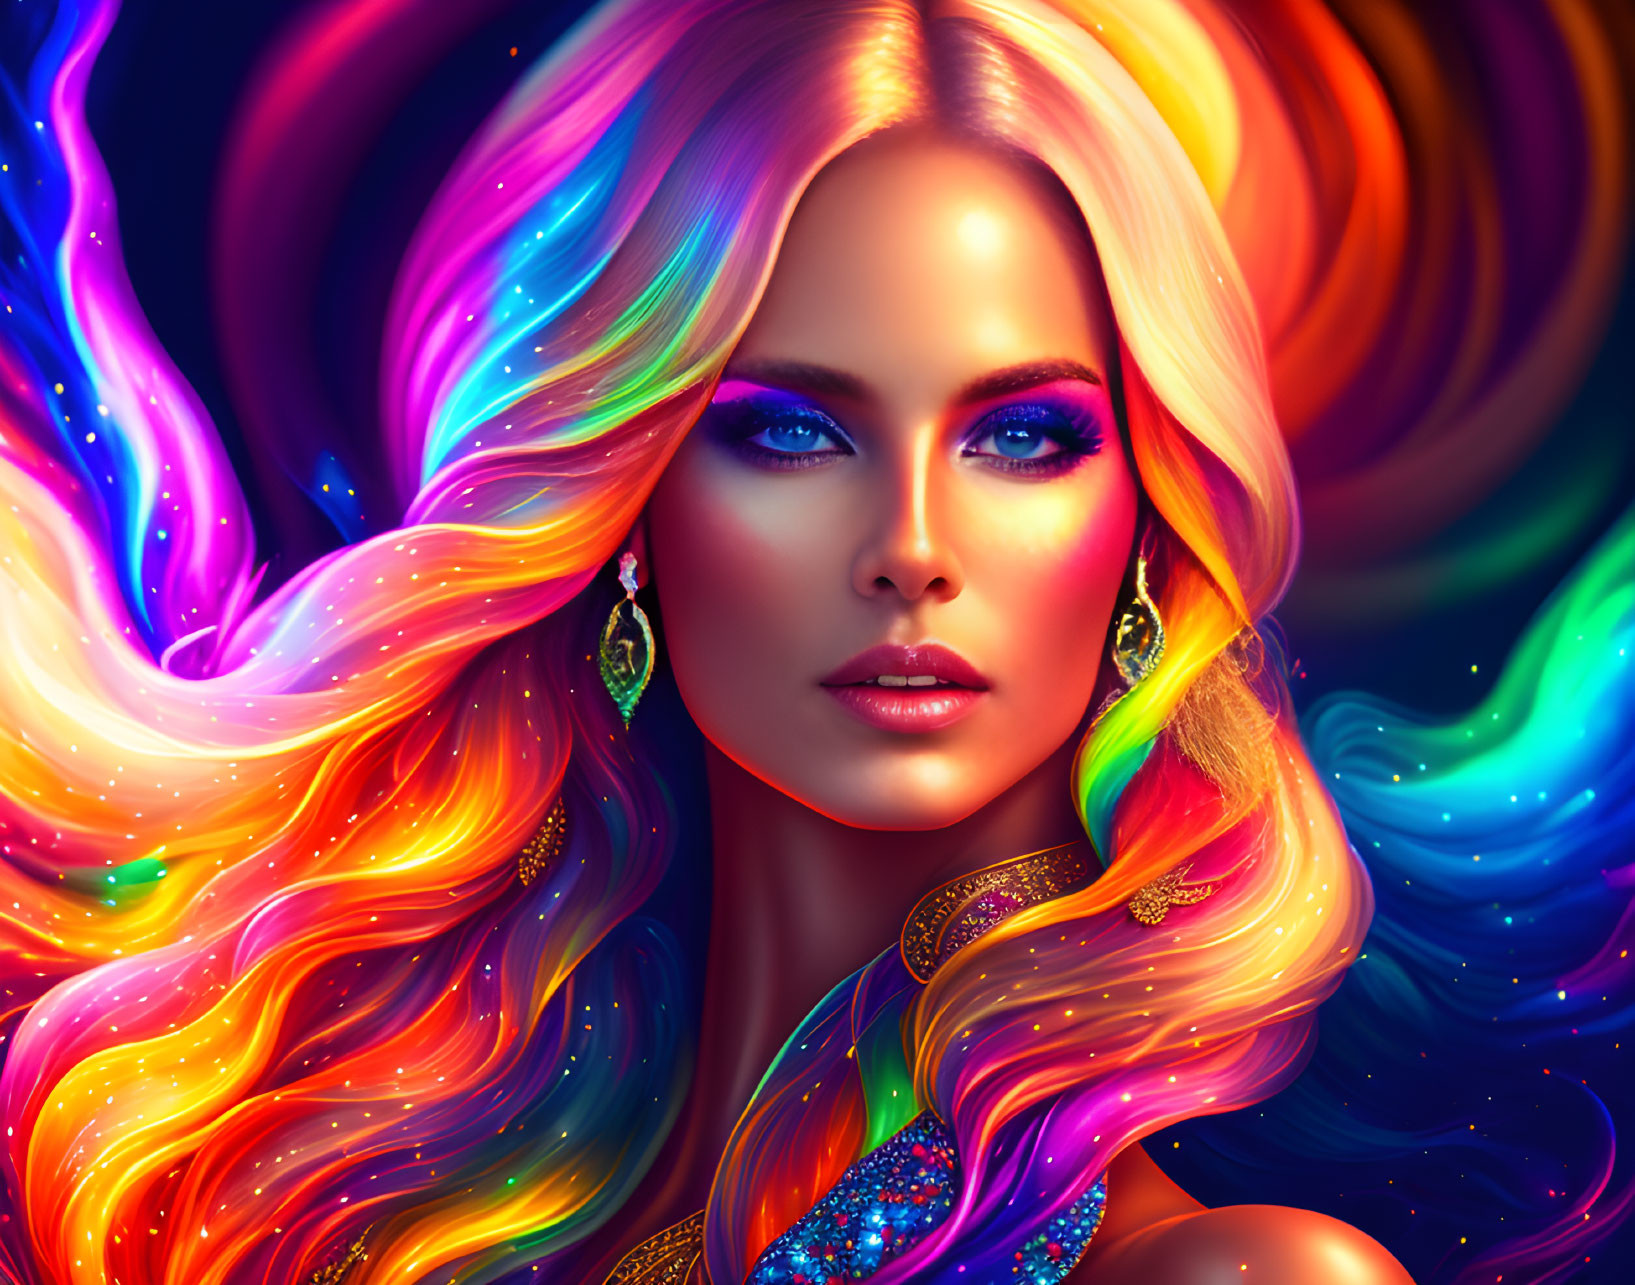 Colorful digital portrait of a woman with flowing hair and blue eyes on rainbow background